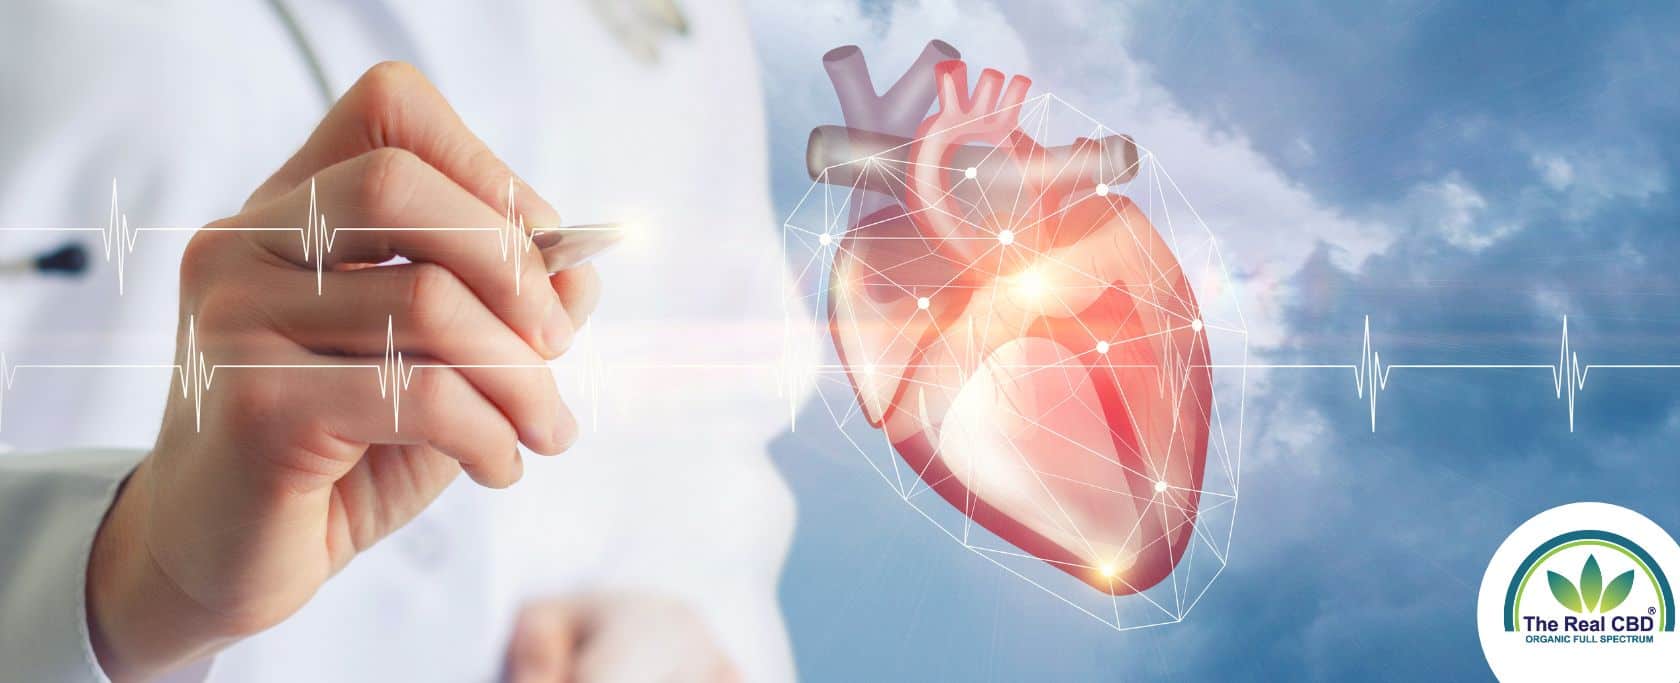 Is CBD safe for heart patients?